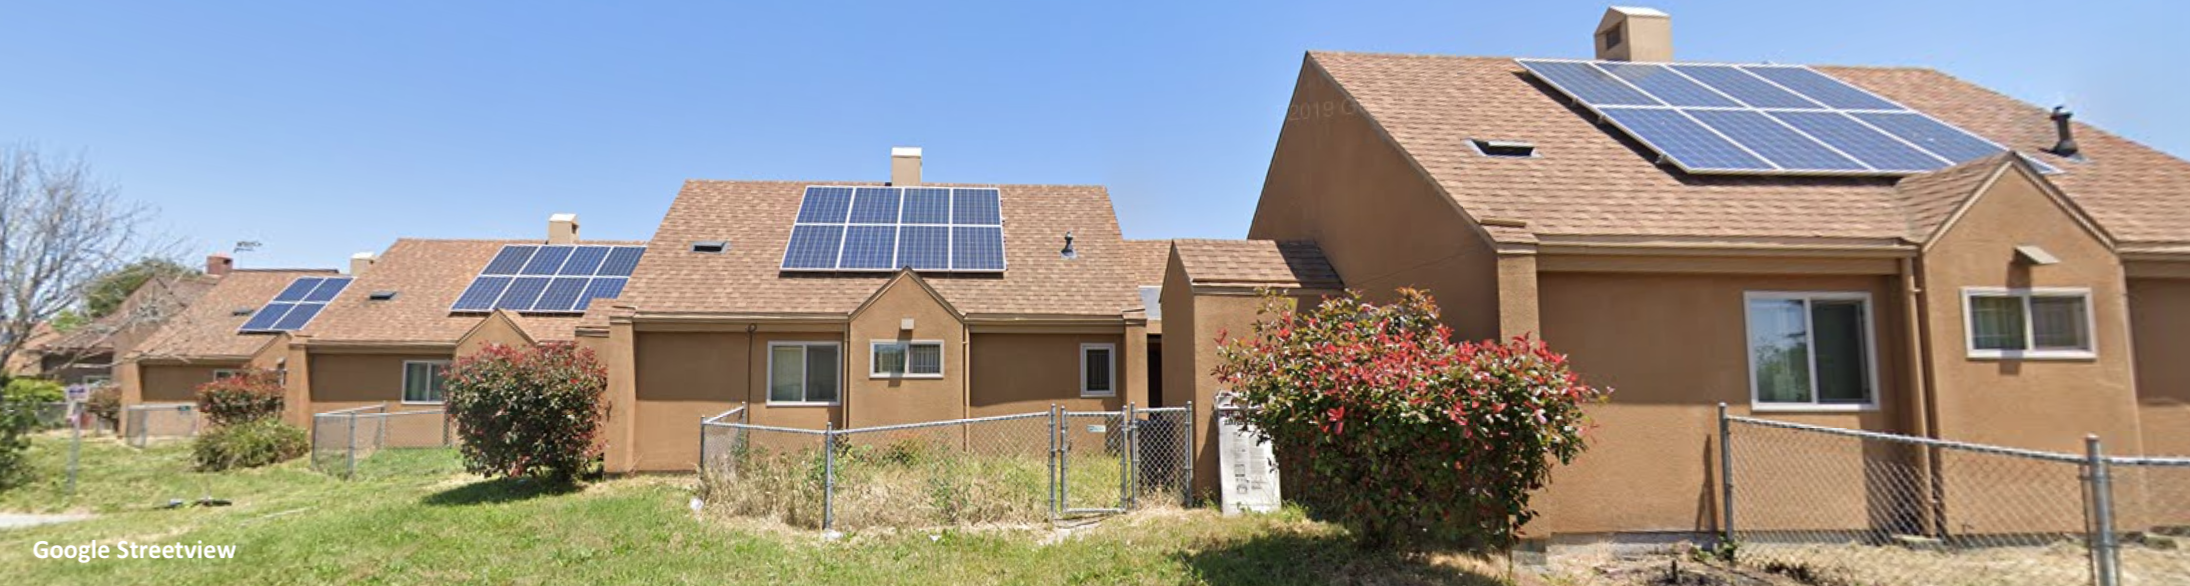 photo of solar panels on residential homes